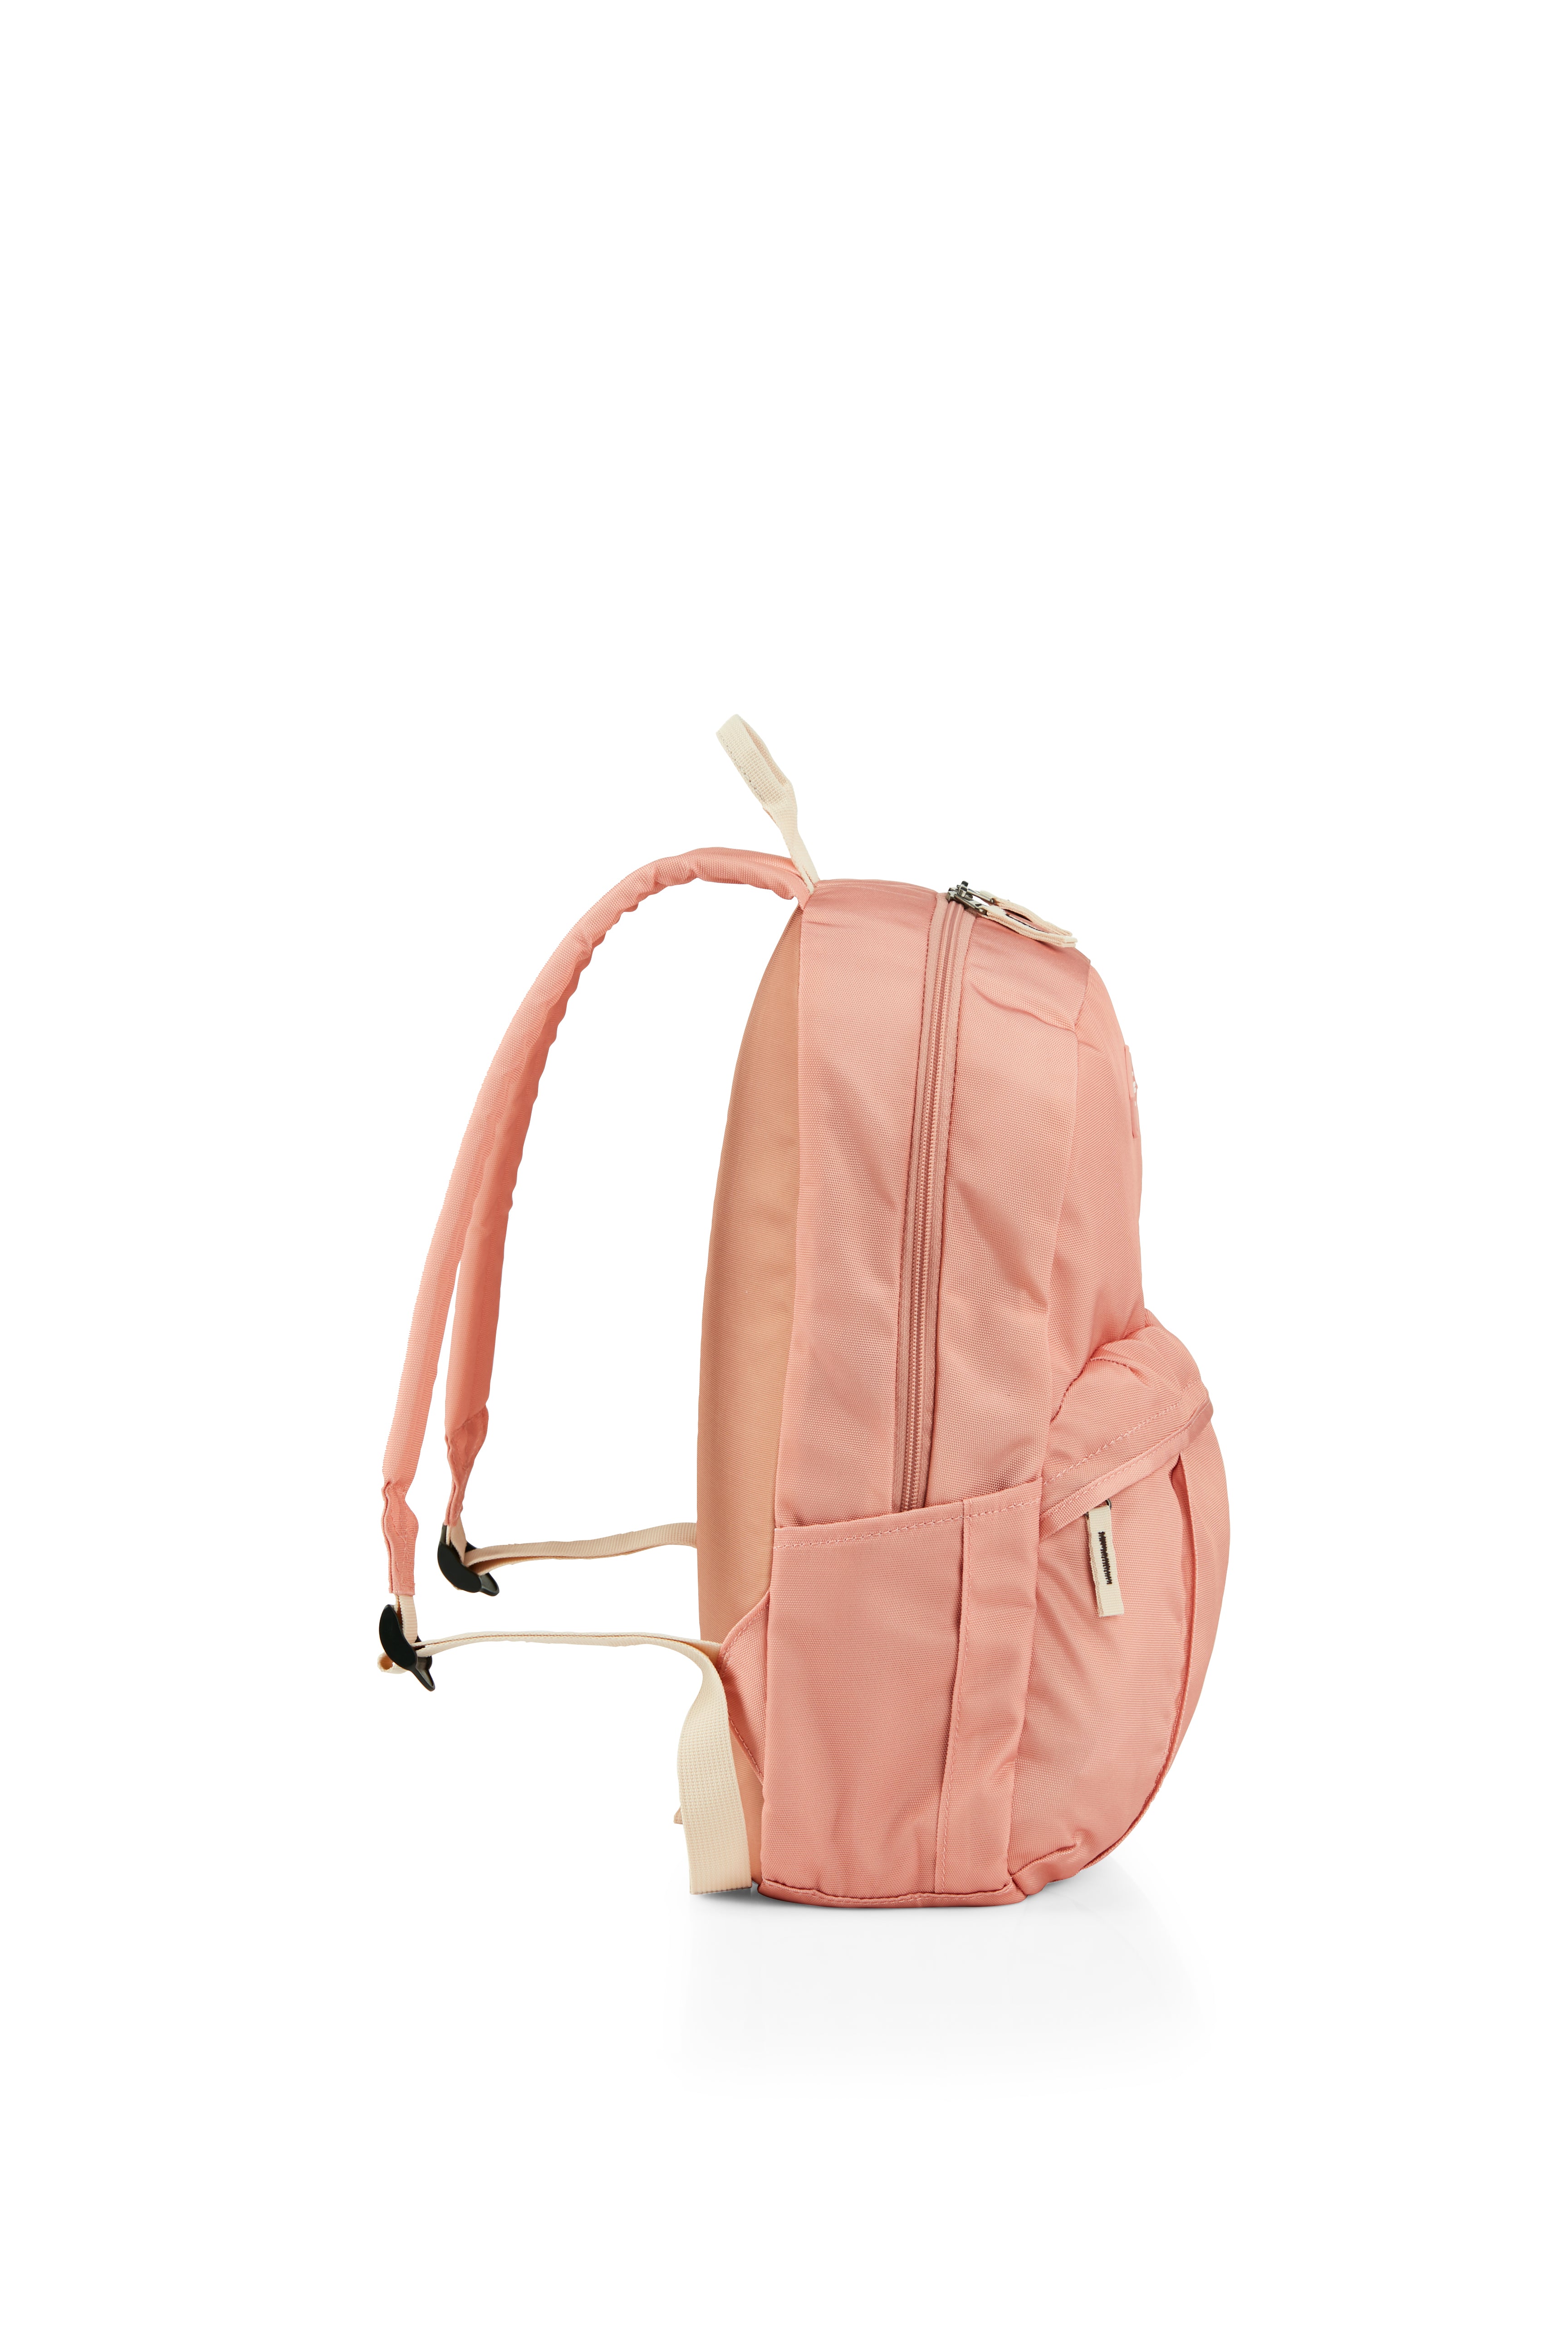 American Tourister - RUDY Small Fashion Backpack - Apricot Ice-5